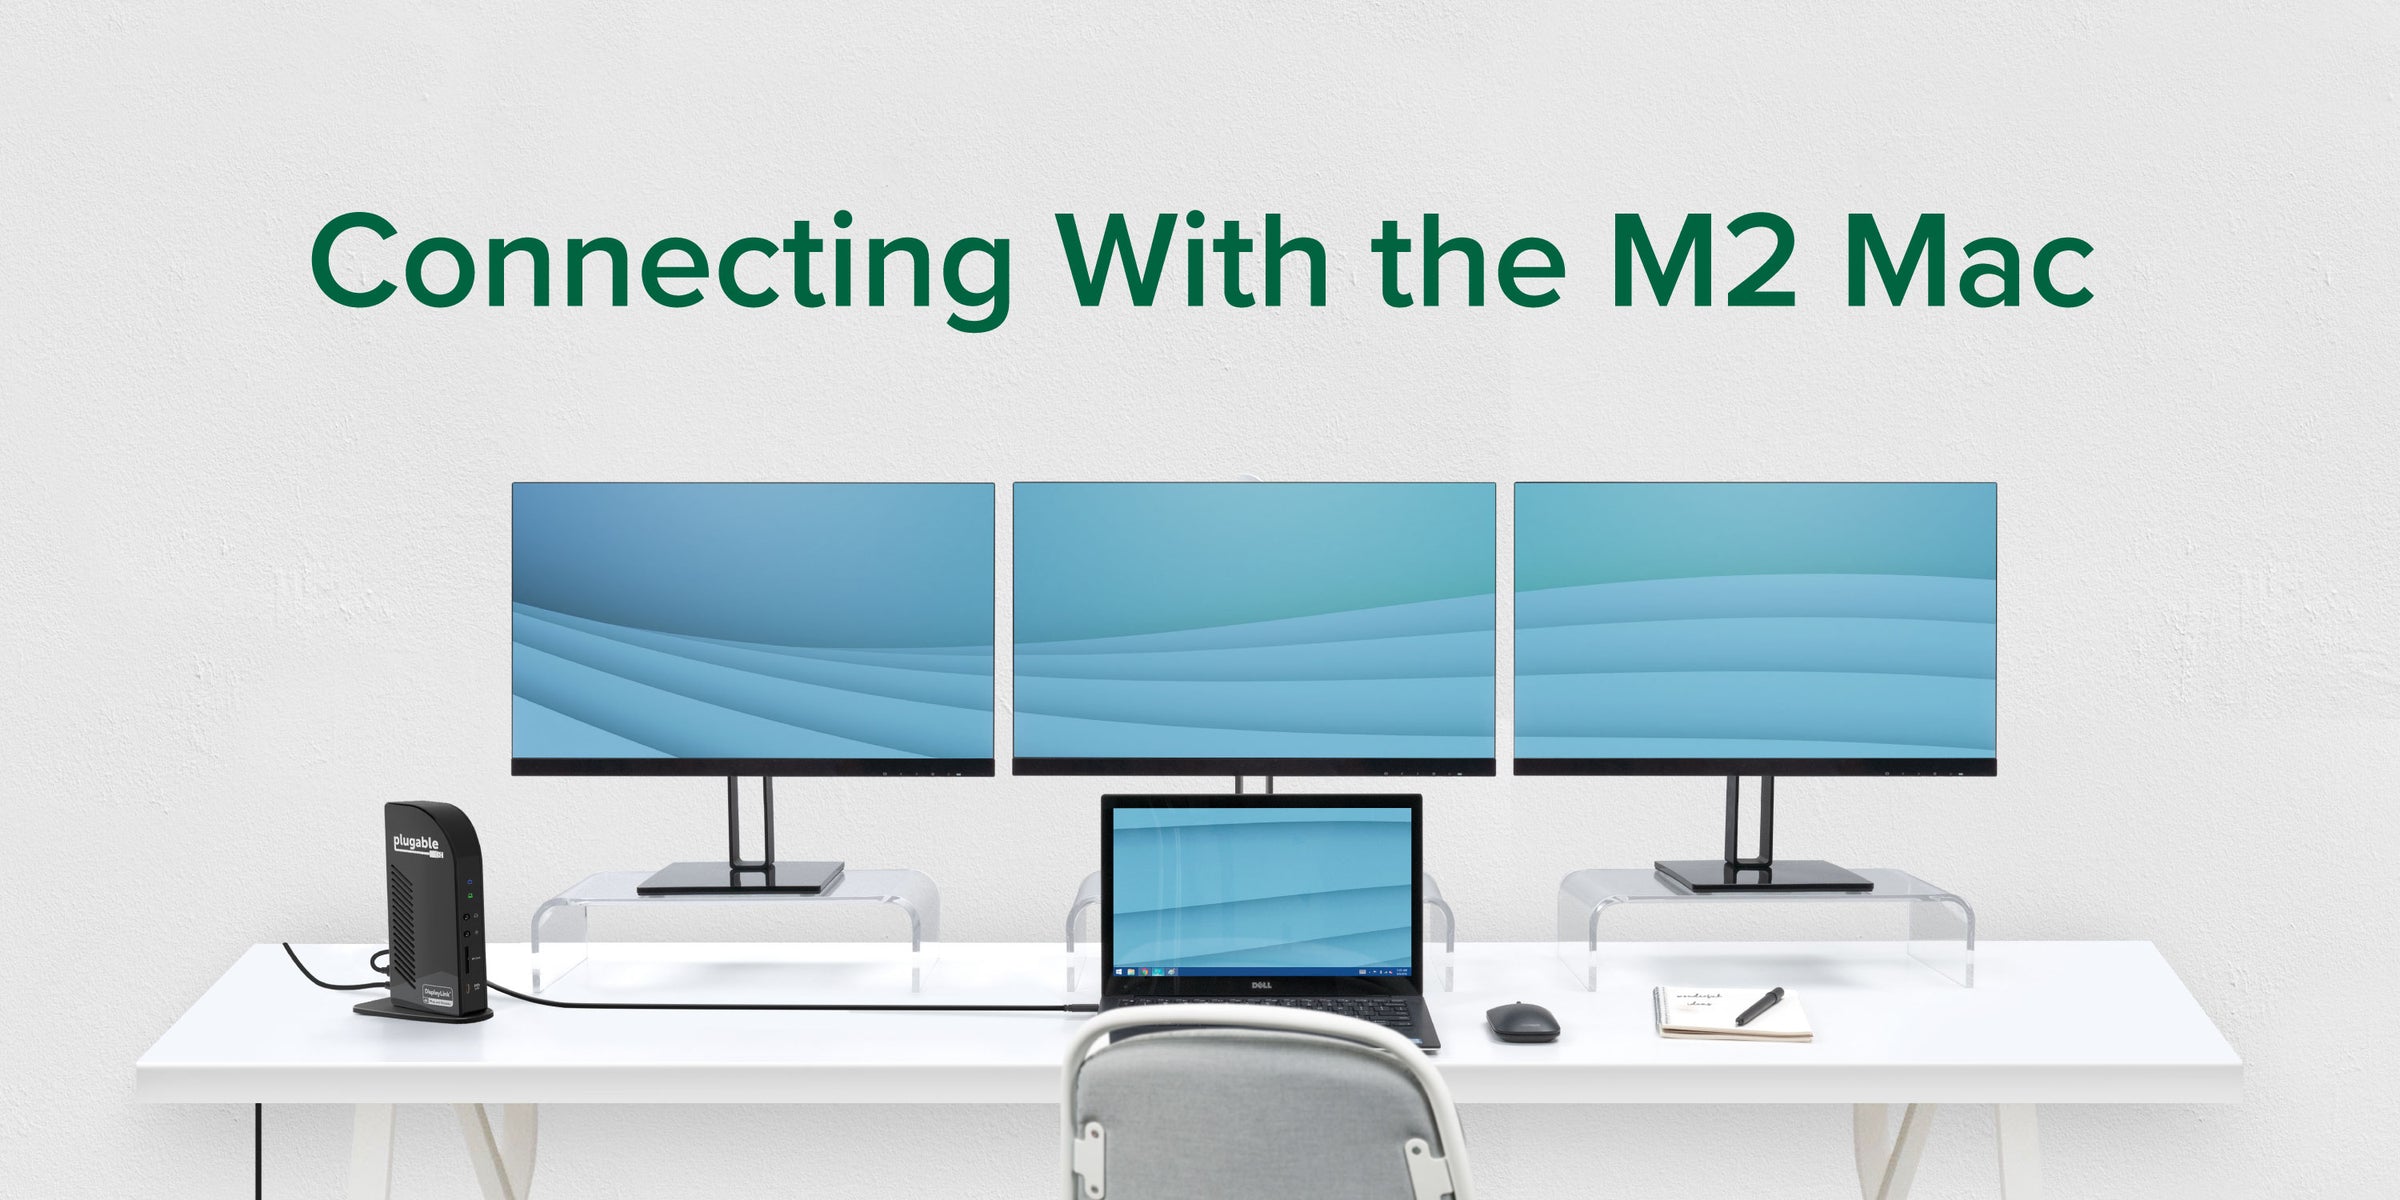 Connecting with the M2 Mac